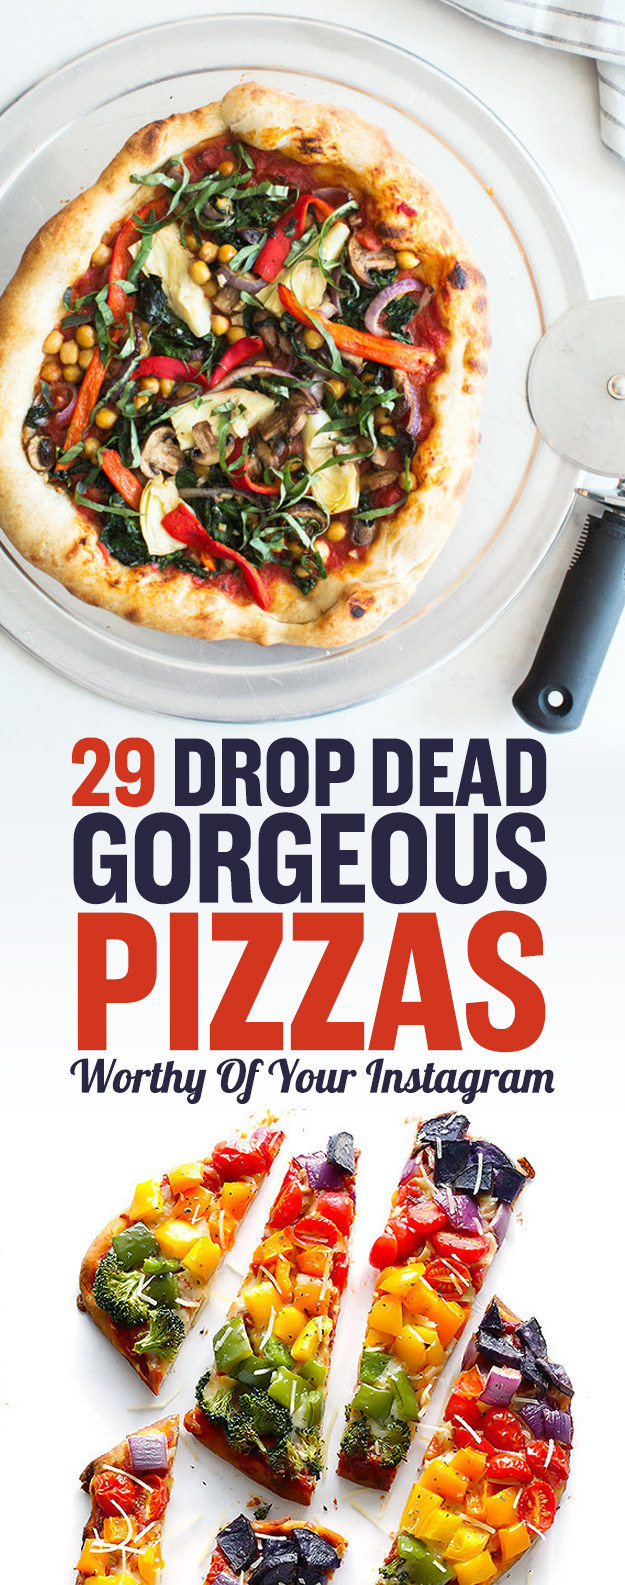 29 Instagram-Worthy Pizza Recipes To Try At Home